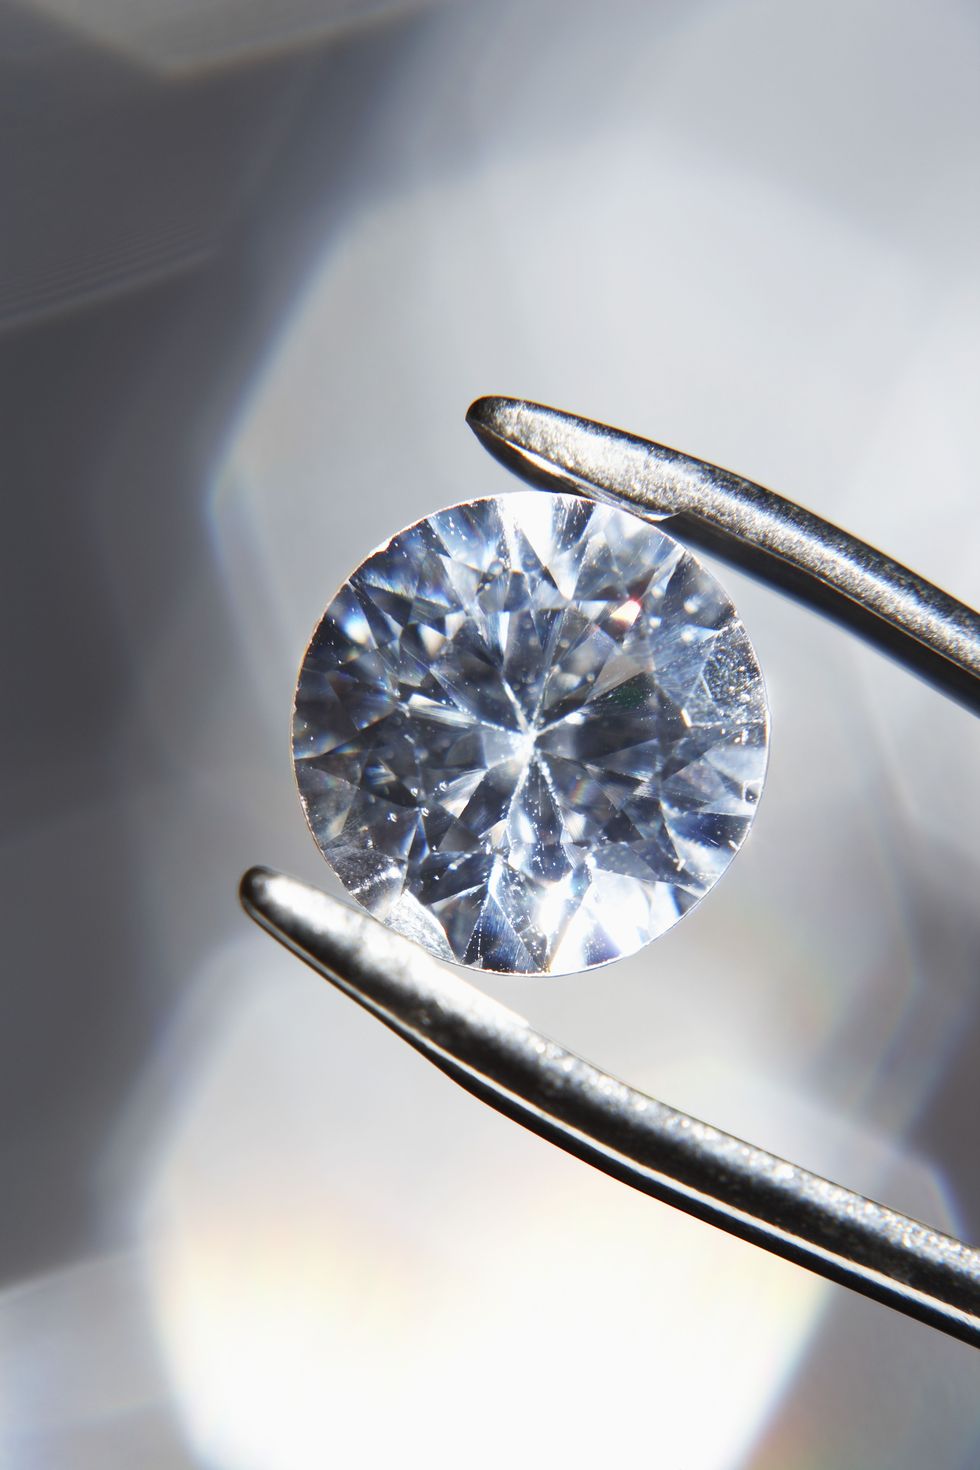 <p>April babies definitely shine bright with a special birthstone. The <a href="https://www.americangemsociety.org/page/aprilbirthstone" target="_blank">diamond is the most valuable</a> of all birthstones, and is <a href="https://www.jewelsforme.com/diamond-meaning" target="_blank">said to represent</a> abundance, strength, power, and courage.</p>